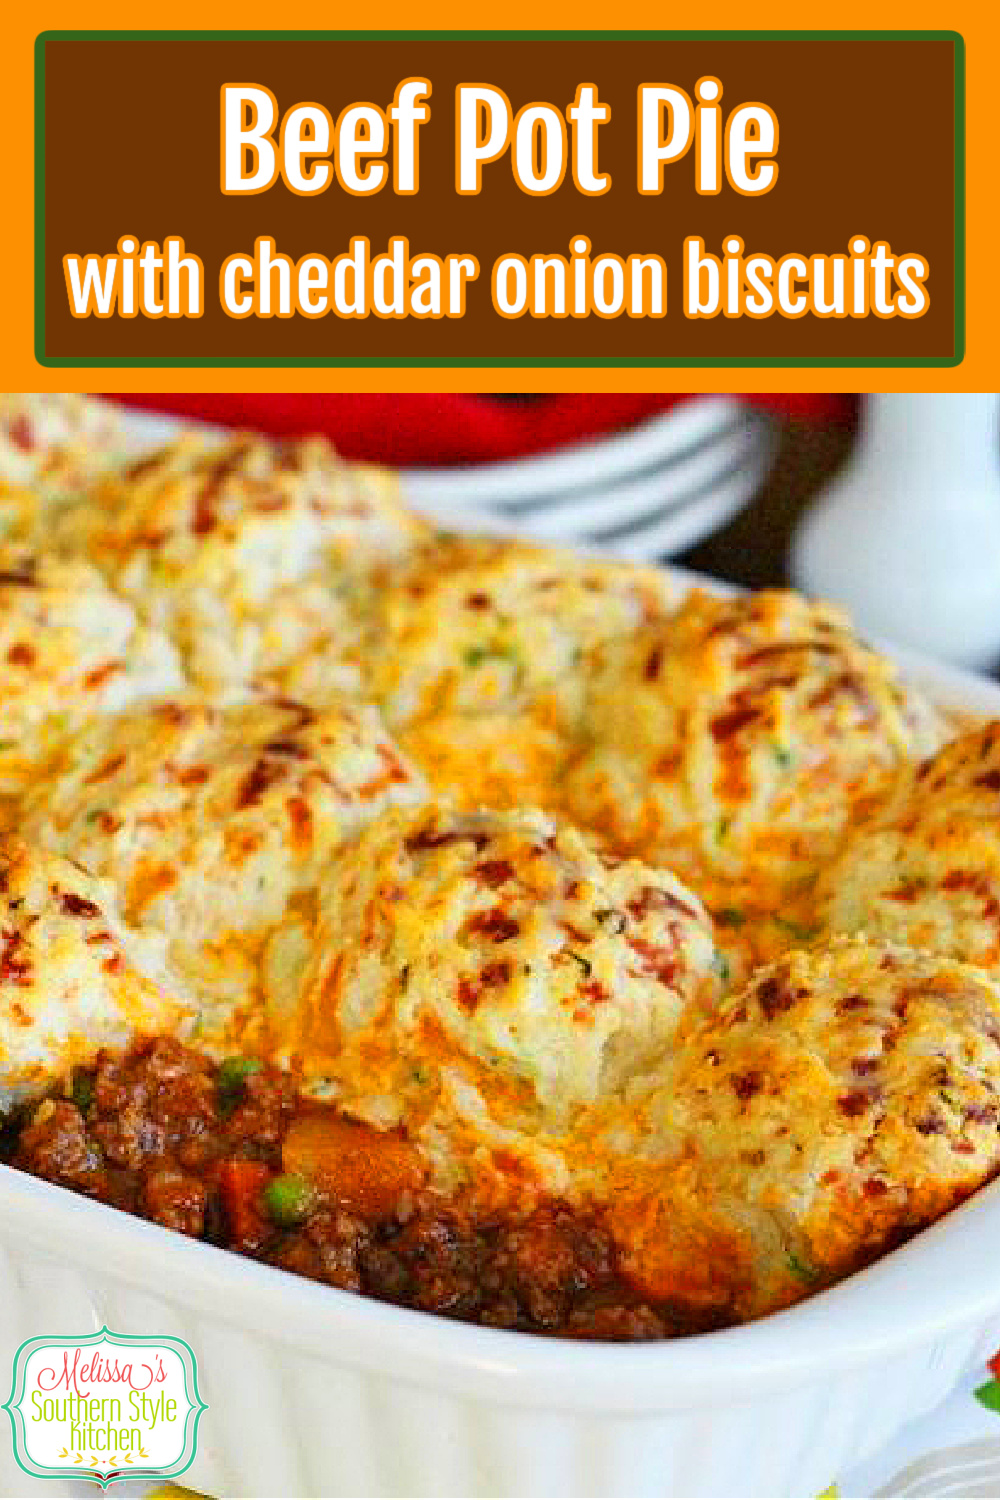 Turn ground beef into comfort food with this Beef Pot Pie topped with homemade with cheddar onion biscuits. #beefpotpie #cheddarbiscuits #biscuitrecipes #casseroles #easygroundbeefrecipes #beef #potpierecipes #dinner #dinnerideas #southernfood #southernrecipes #bestpotpierecipe via @melissasssk